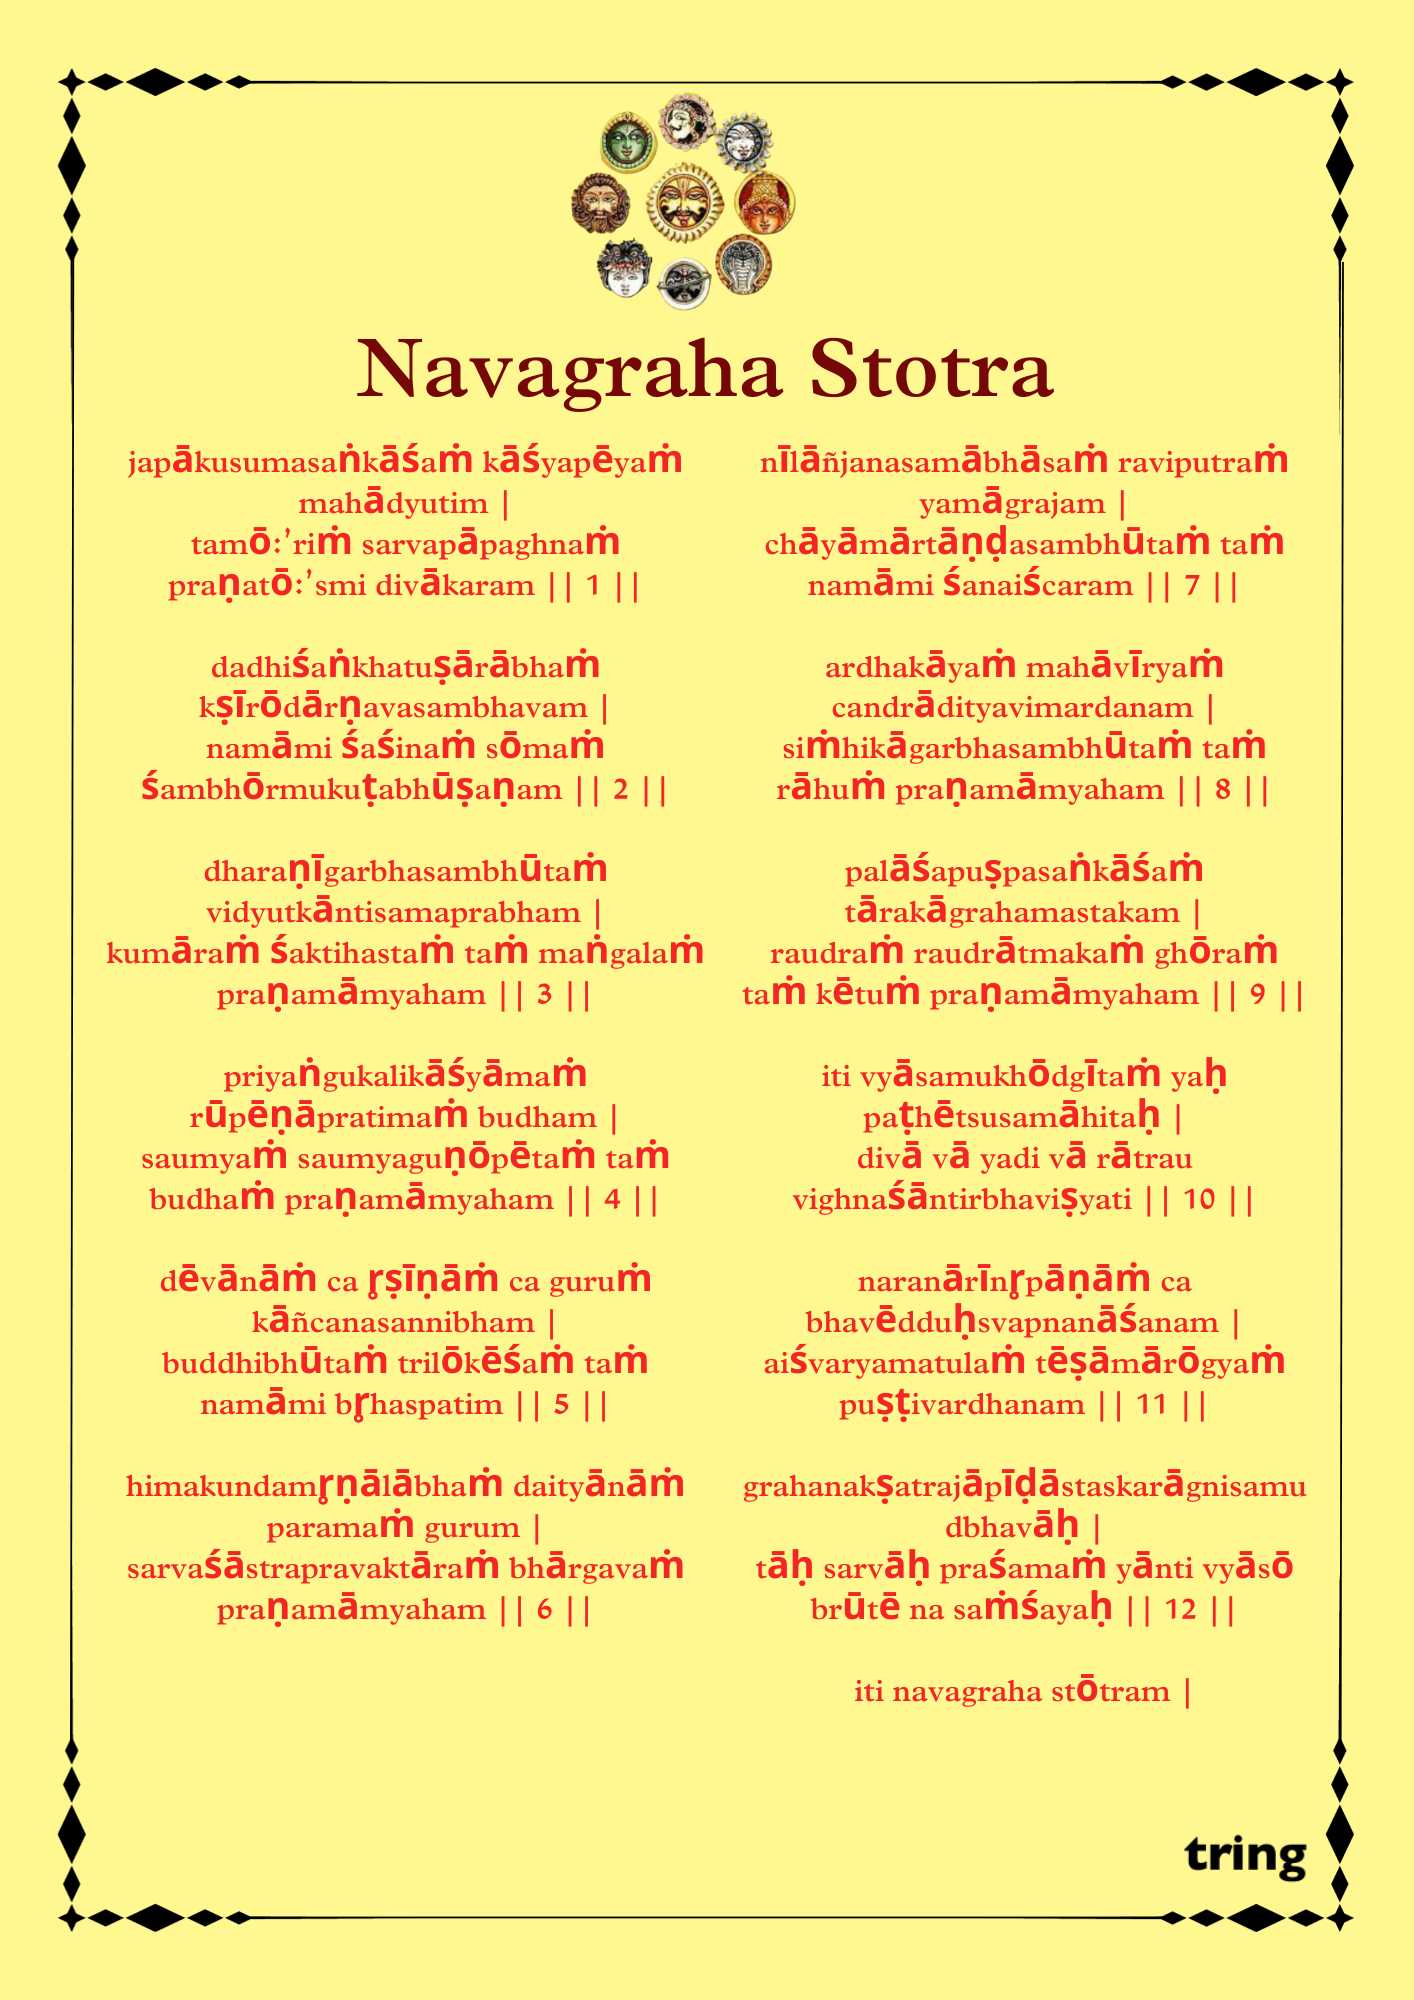 Navagraha Stotra Images (2)